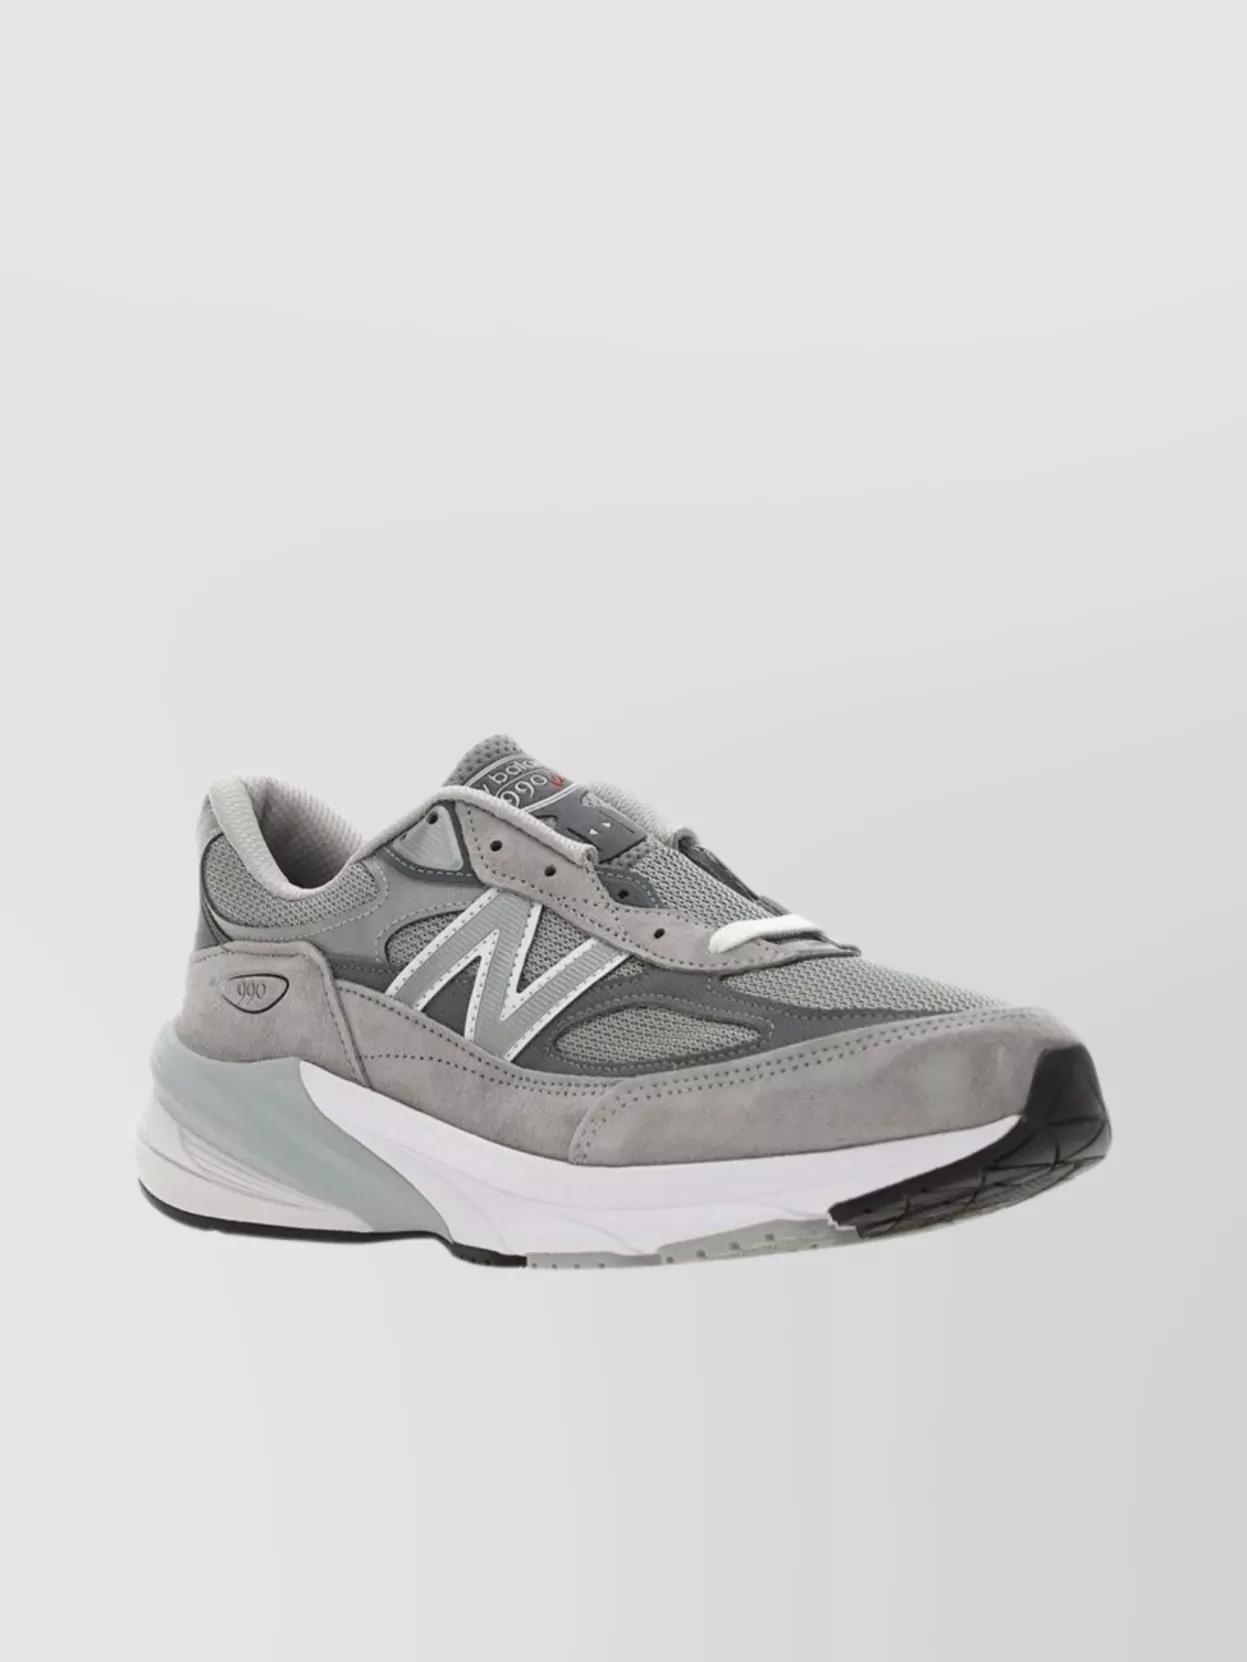 Shop New Balance 990 Sneakers With Mesh Panels And Suede Overlays